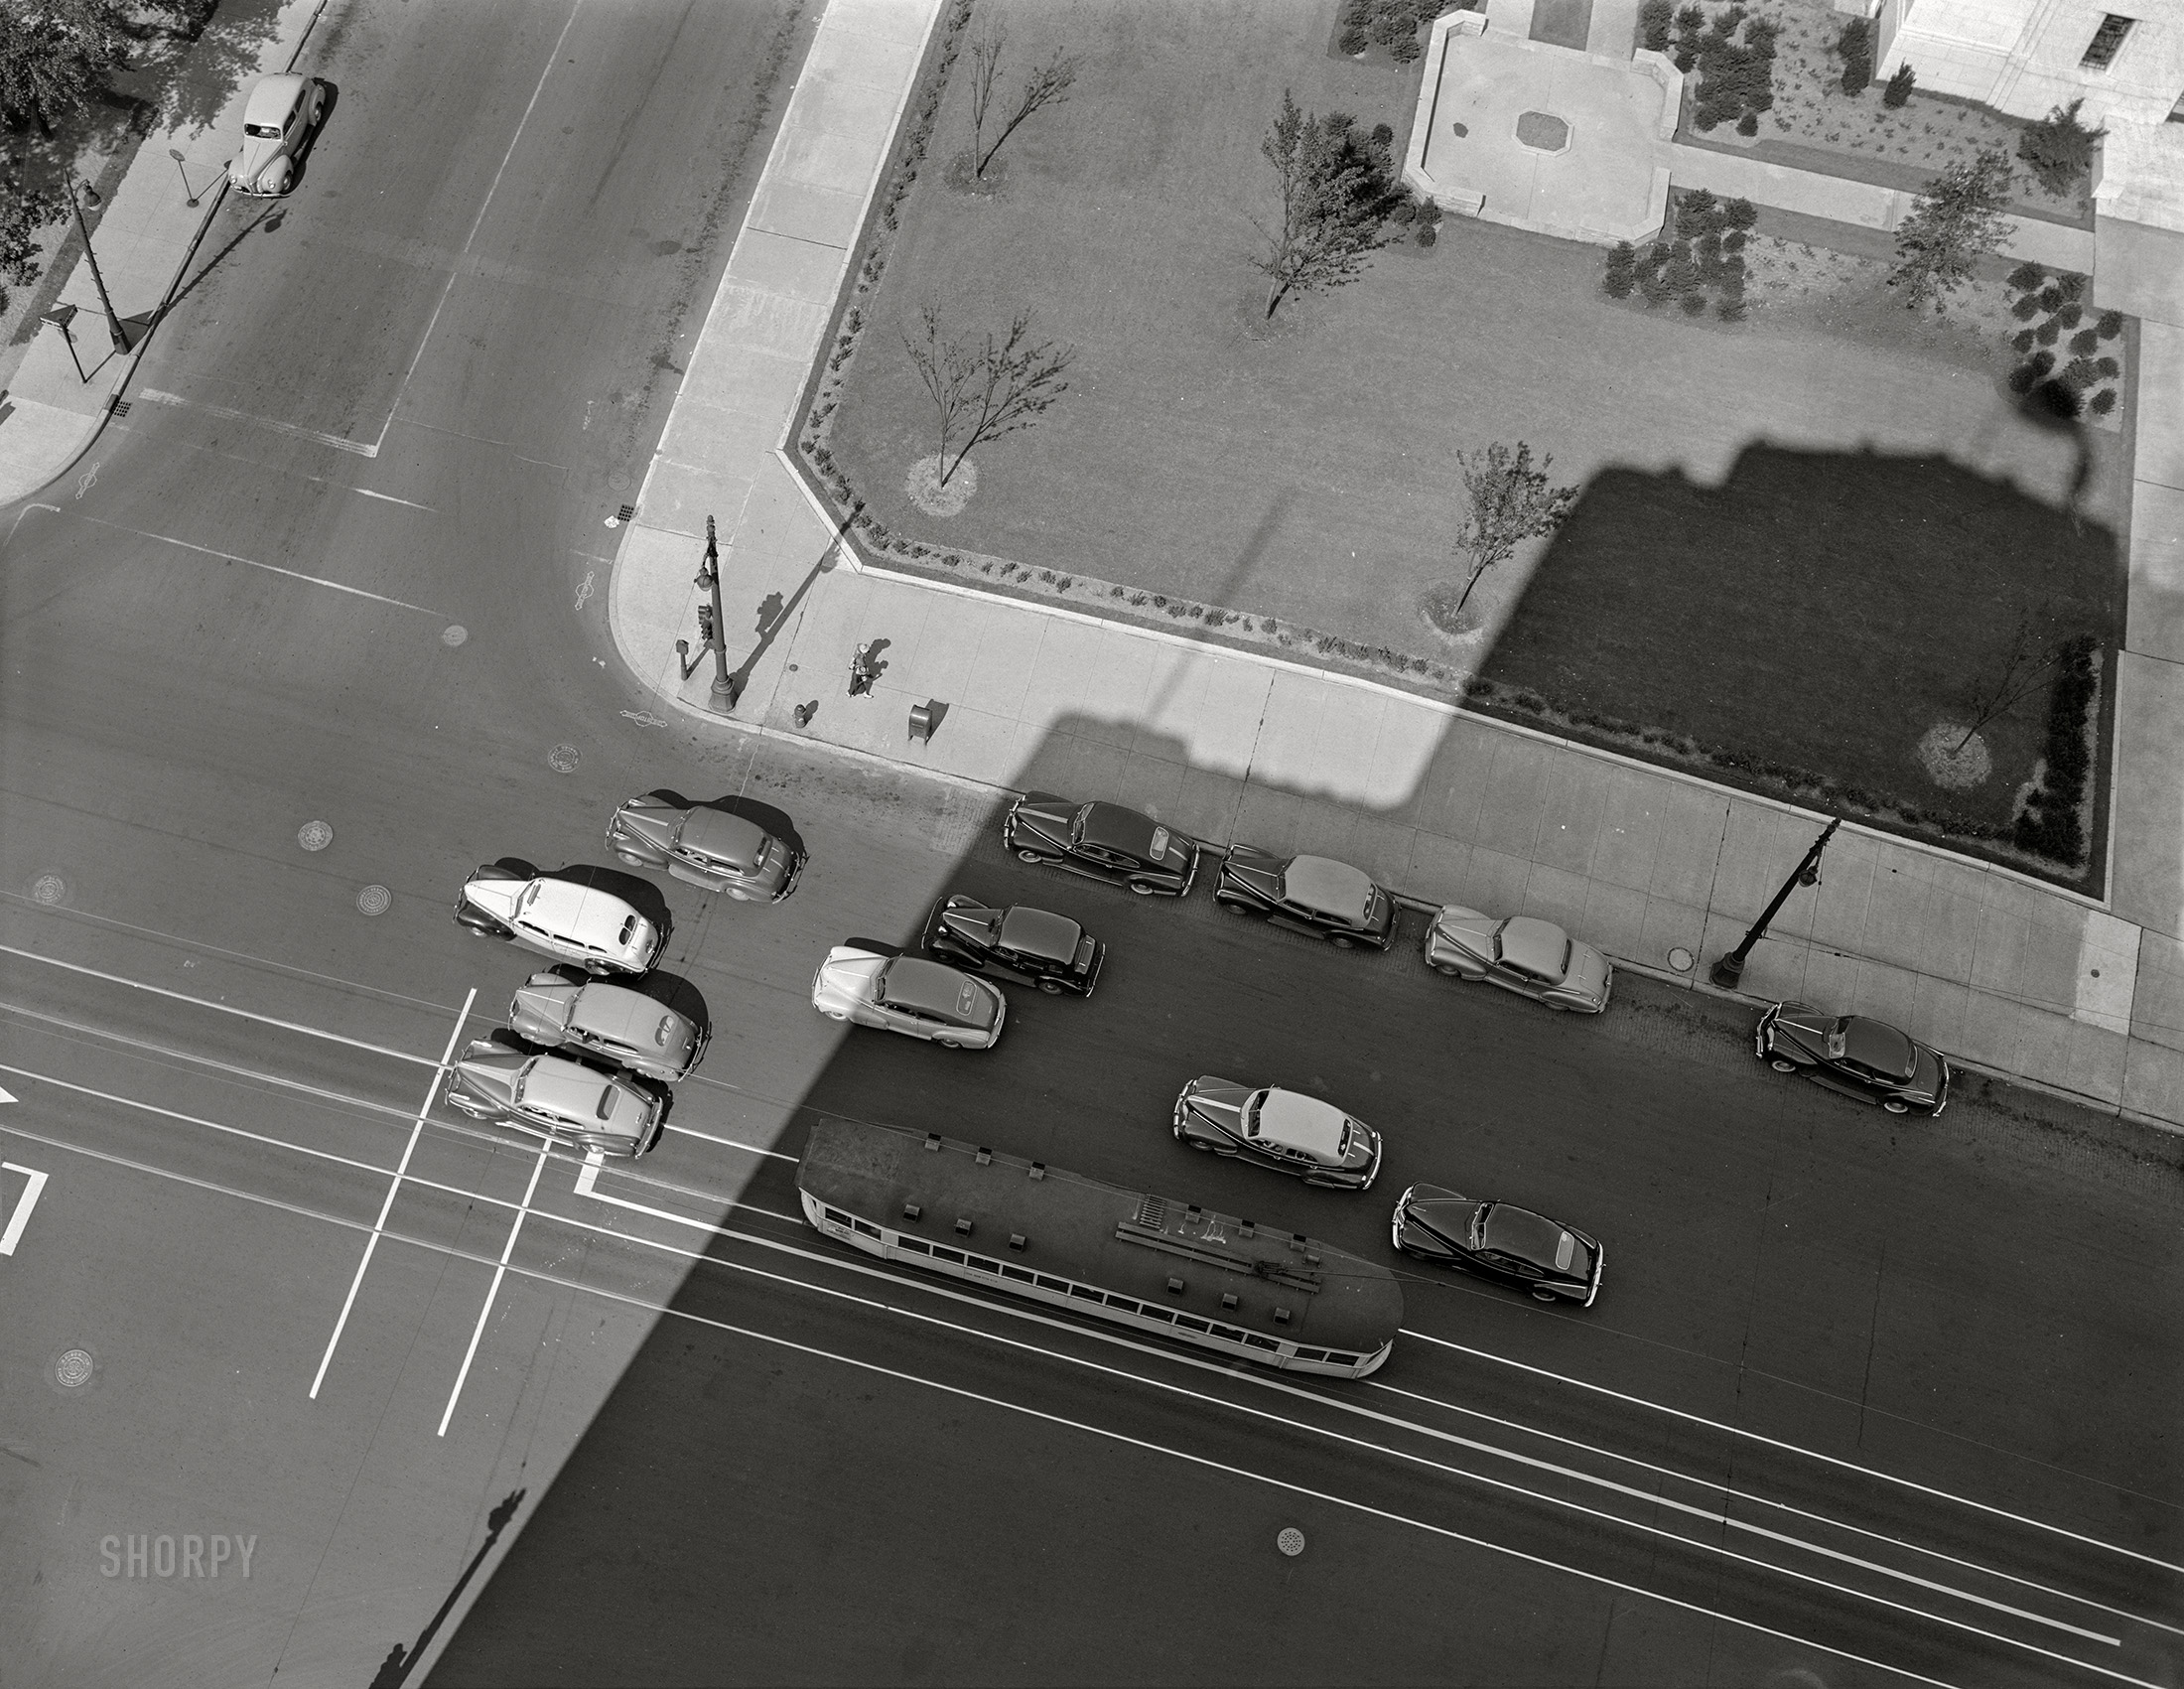 July 1942. Detroit, Michigan. "Street scenes in the downtown business section. Cars waiting for a traffic light on a street with traffic markings." More specifically, Woodward Avenue at Farnsworth Street as seen from the Maccabees Building. 4x5 inch acetate negative by Arthur Siegel for the Farm Security Administration. View full size.